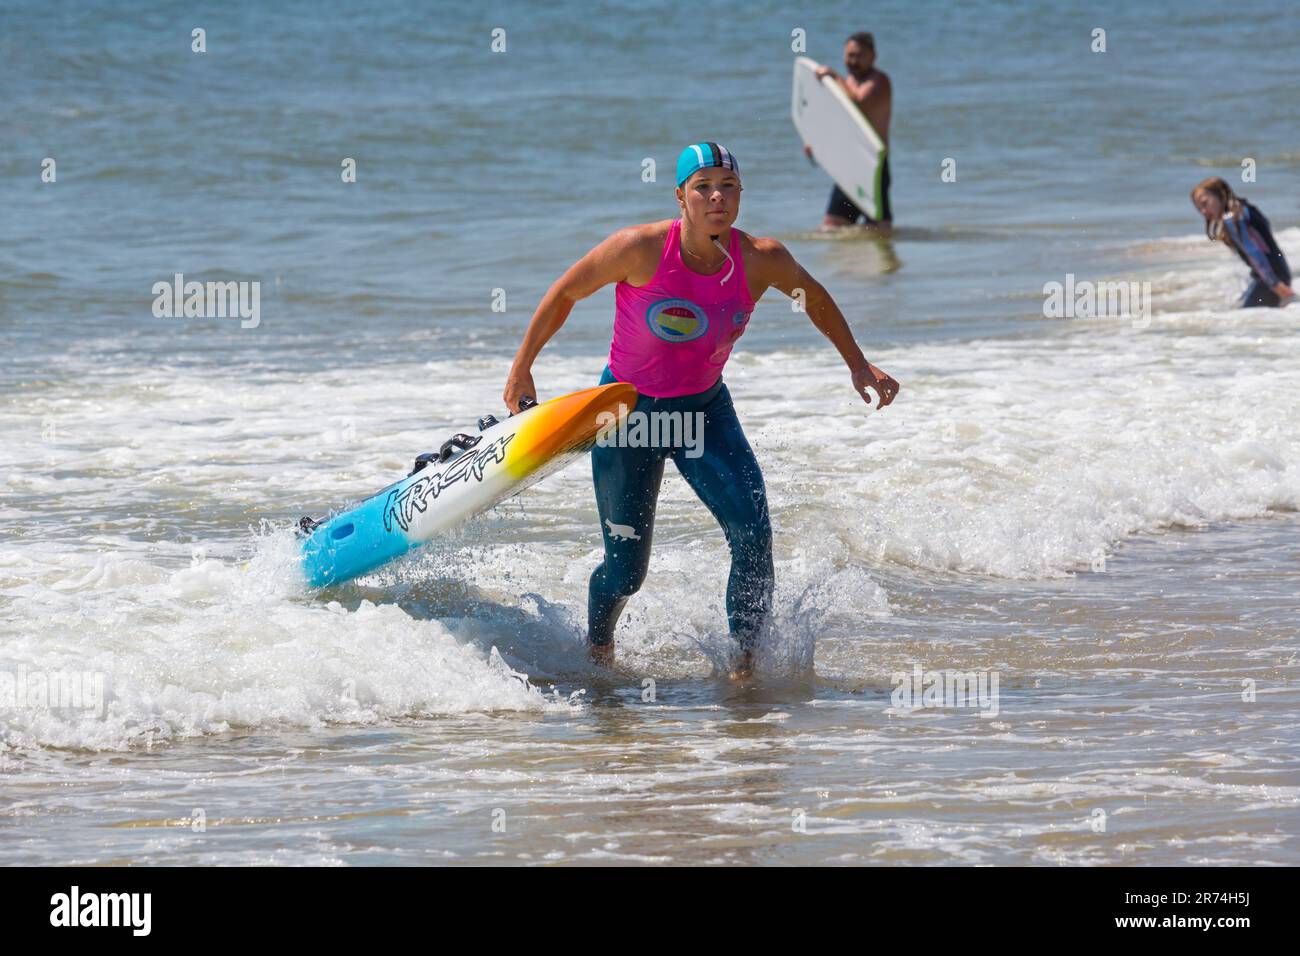 Young woman carrying paddle board paddleboard, the Surf Life Saving GB GBR Beach Trial Weekend at Branksome Chine, Poole, Dorset, England UK in June Stock Photo